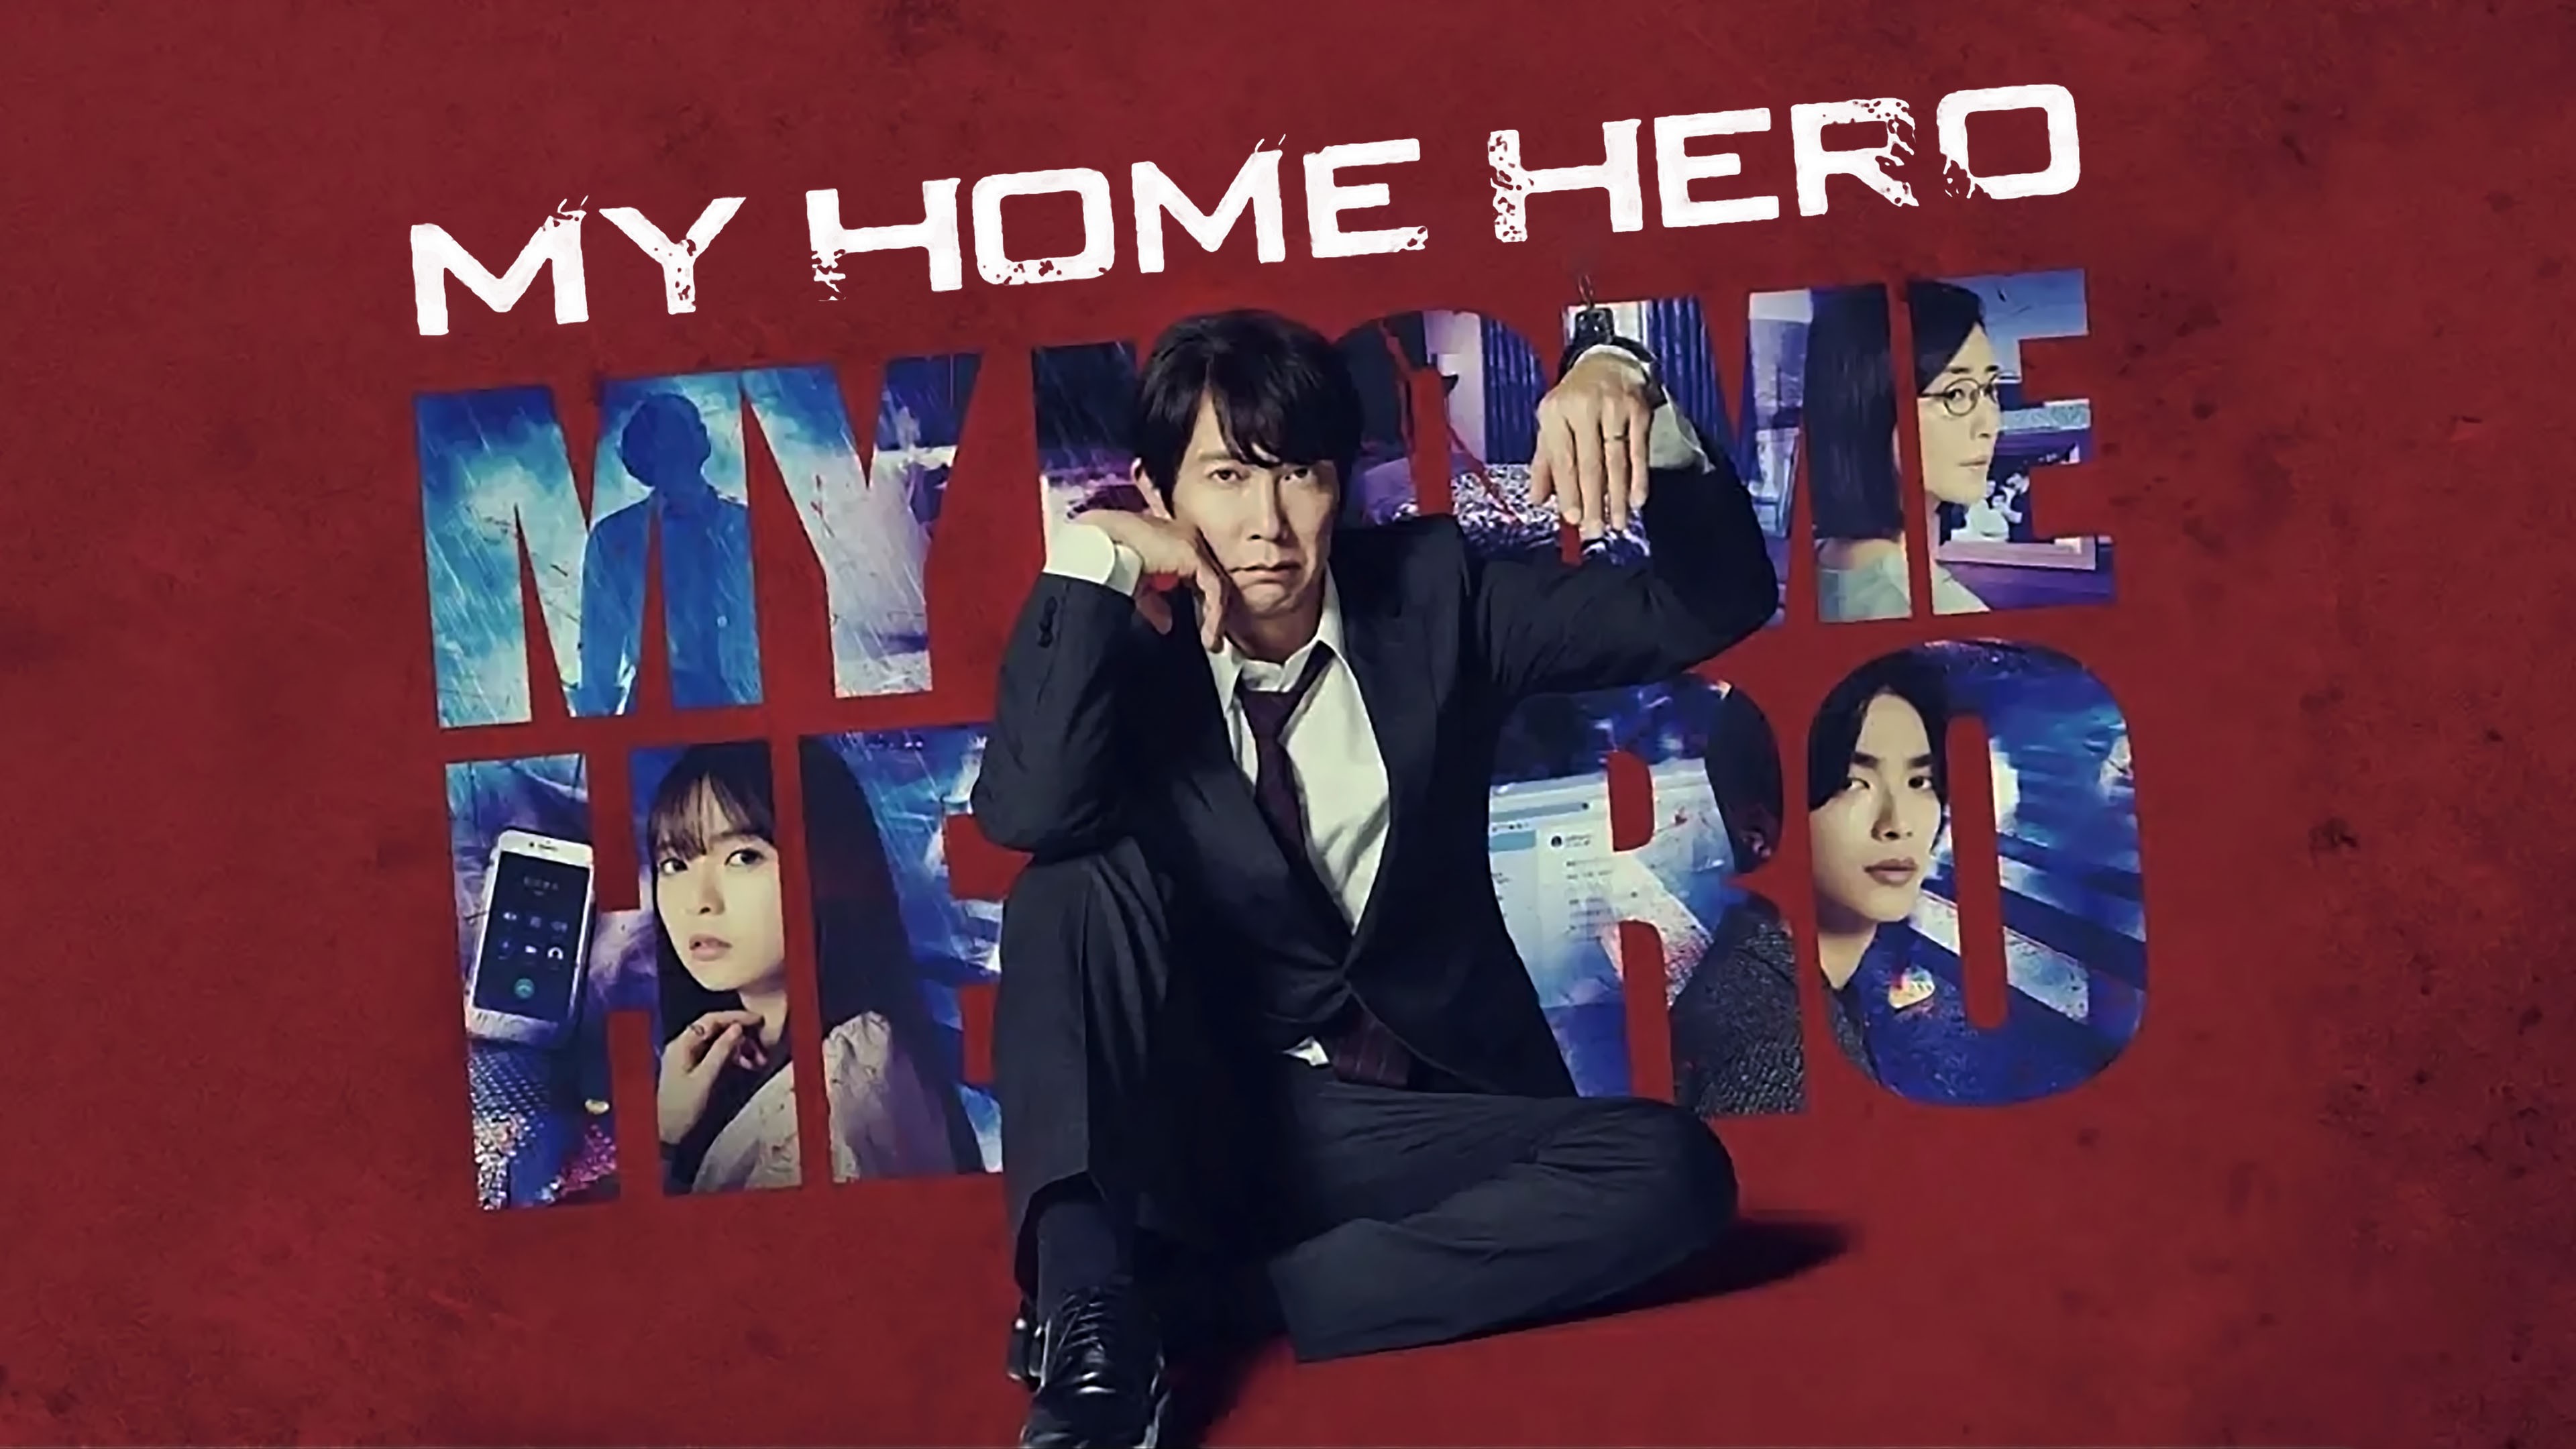 My Home Hero Live-Action TV Drama and Film Plans Revealed - Crunchyroll News